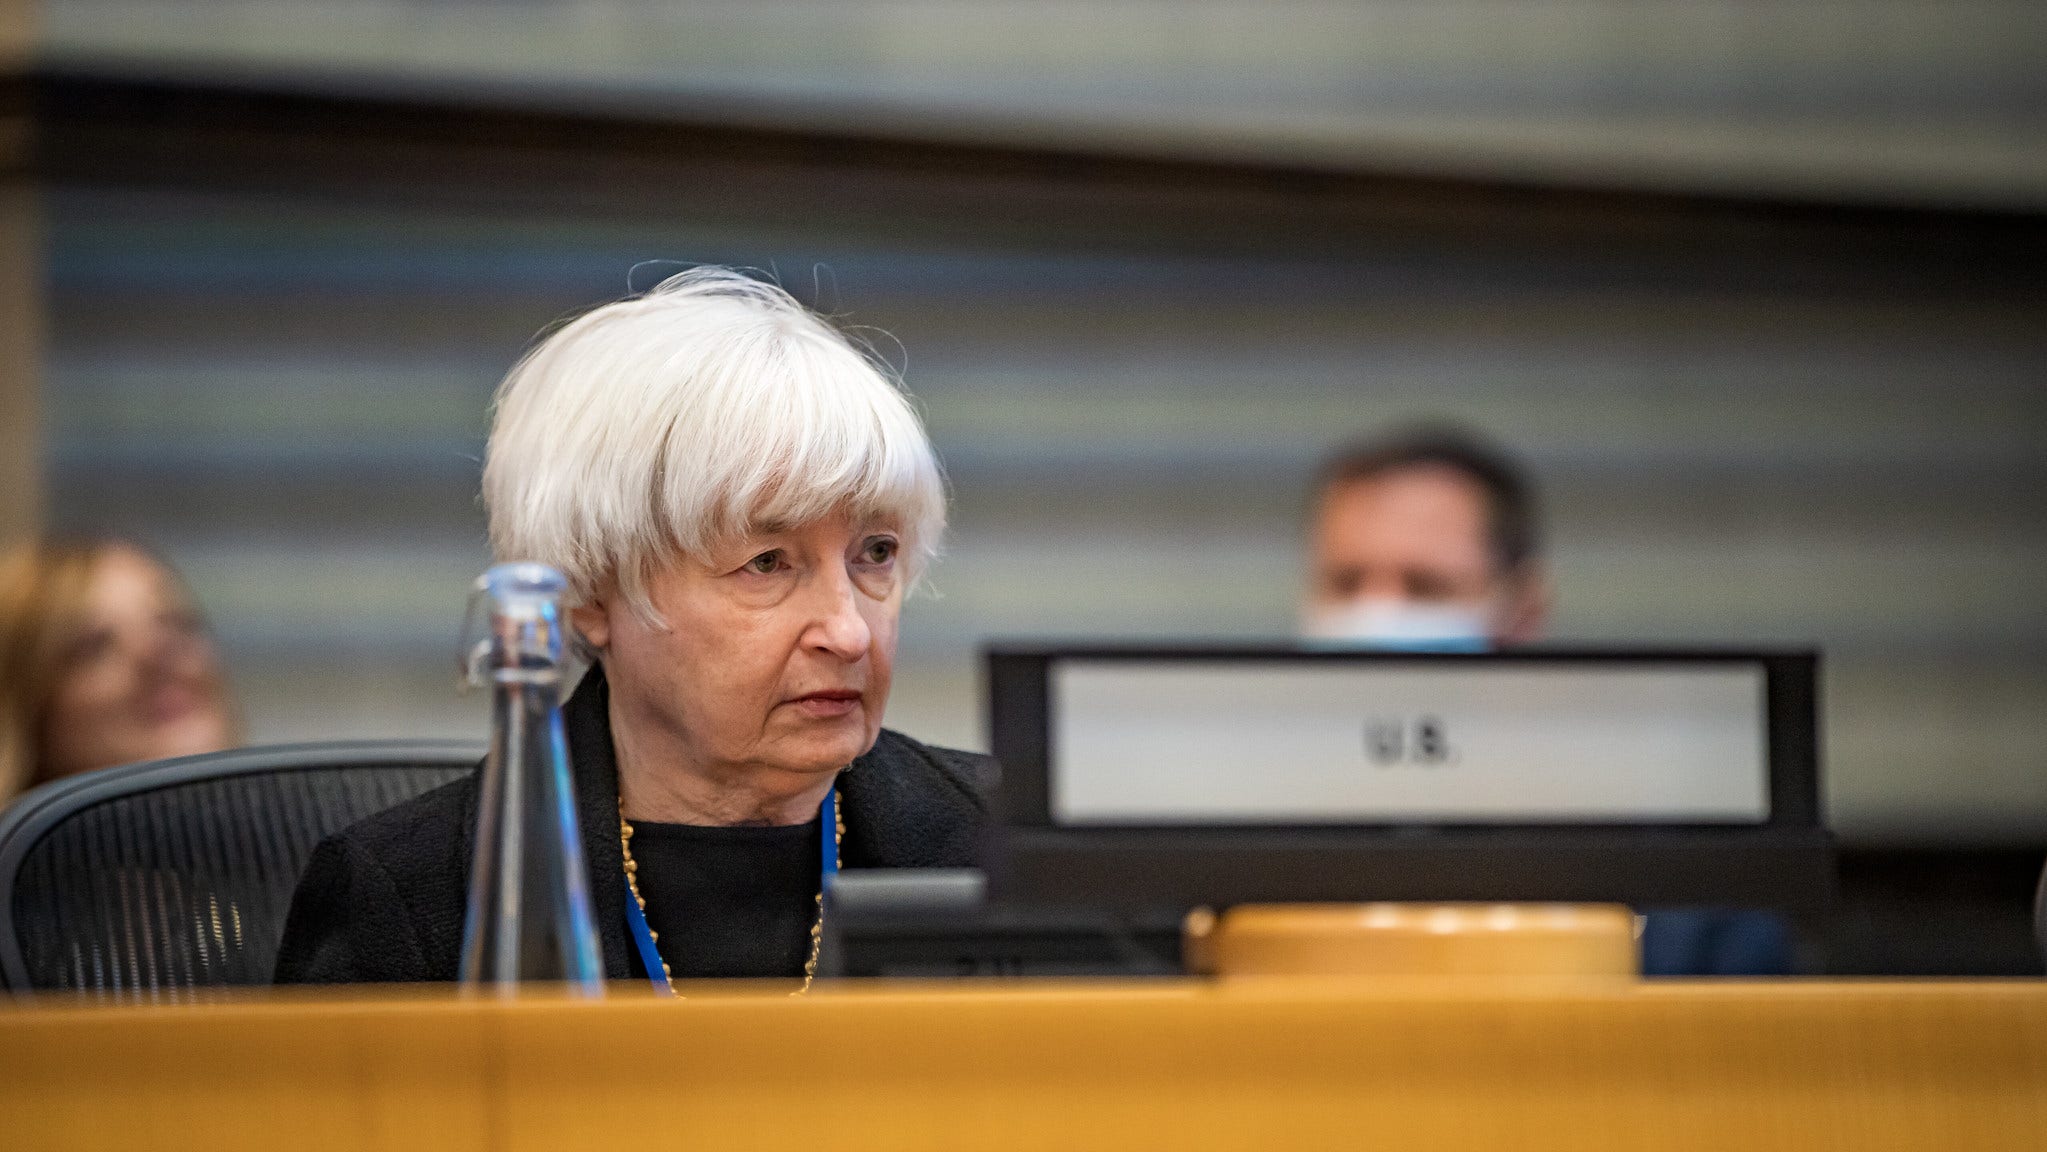 Janet Yellen Calls OPEC+ Move 'Unhelpful And Unwise' For Global Economy: 'Very Worried About Developing Countries'